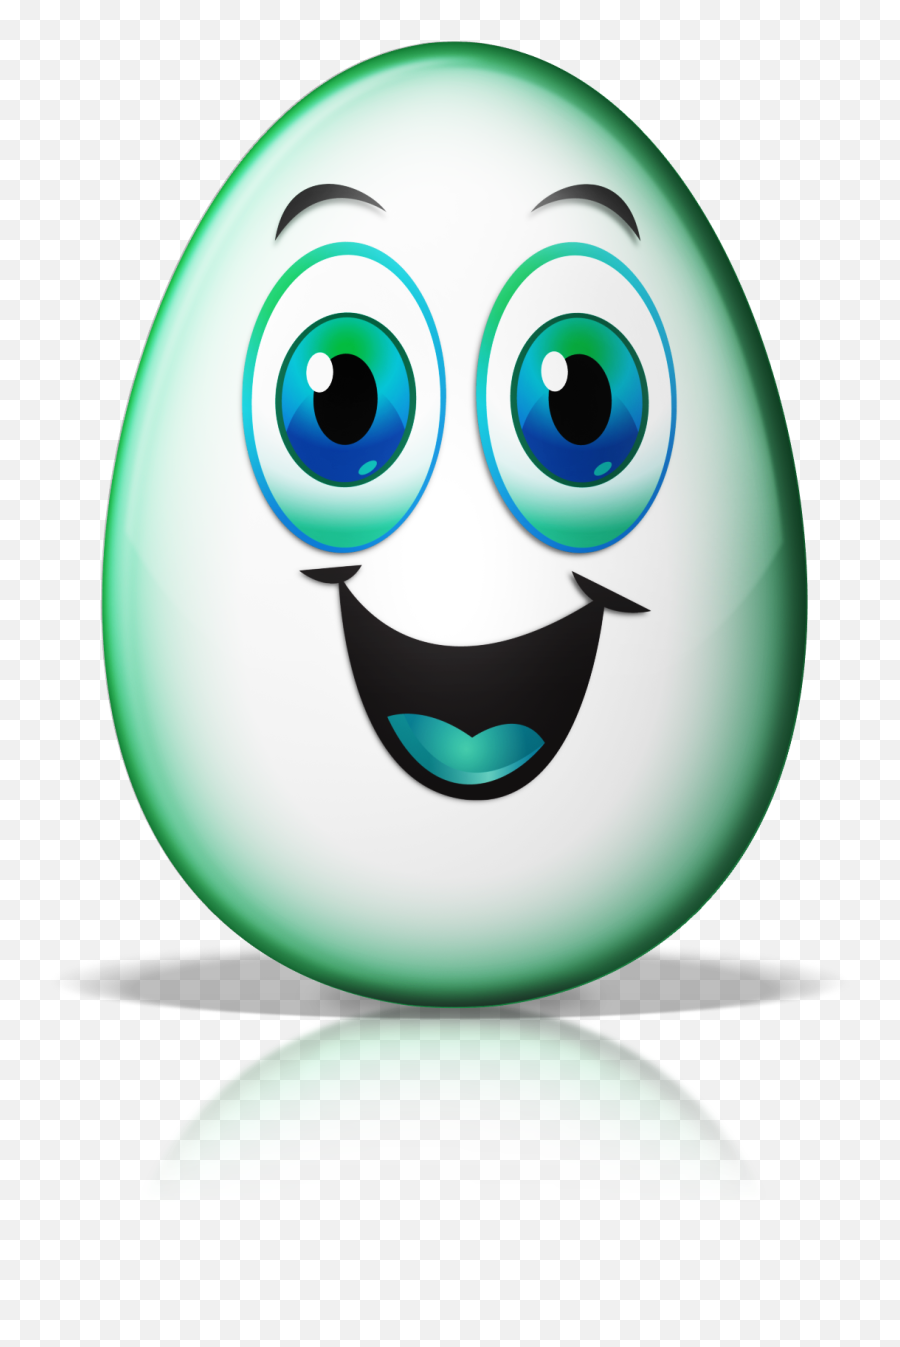 Artistic Digitizer Layer And Edit Shapes Janome Life - Egg With Face Animated Emoji,Egg Emoticon